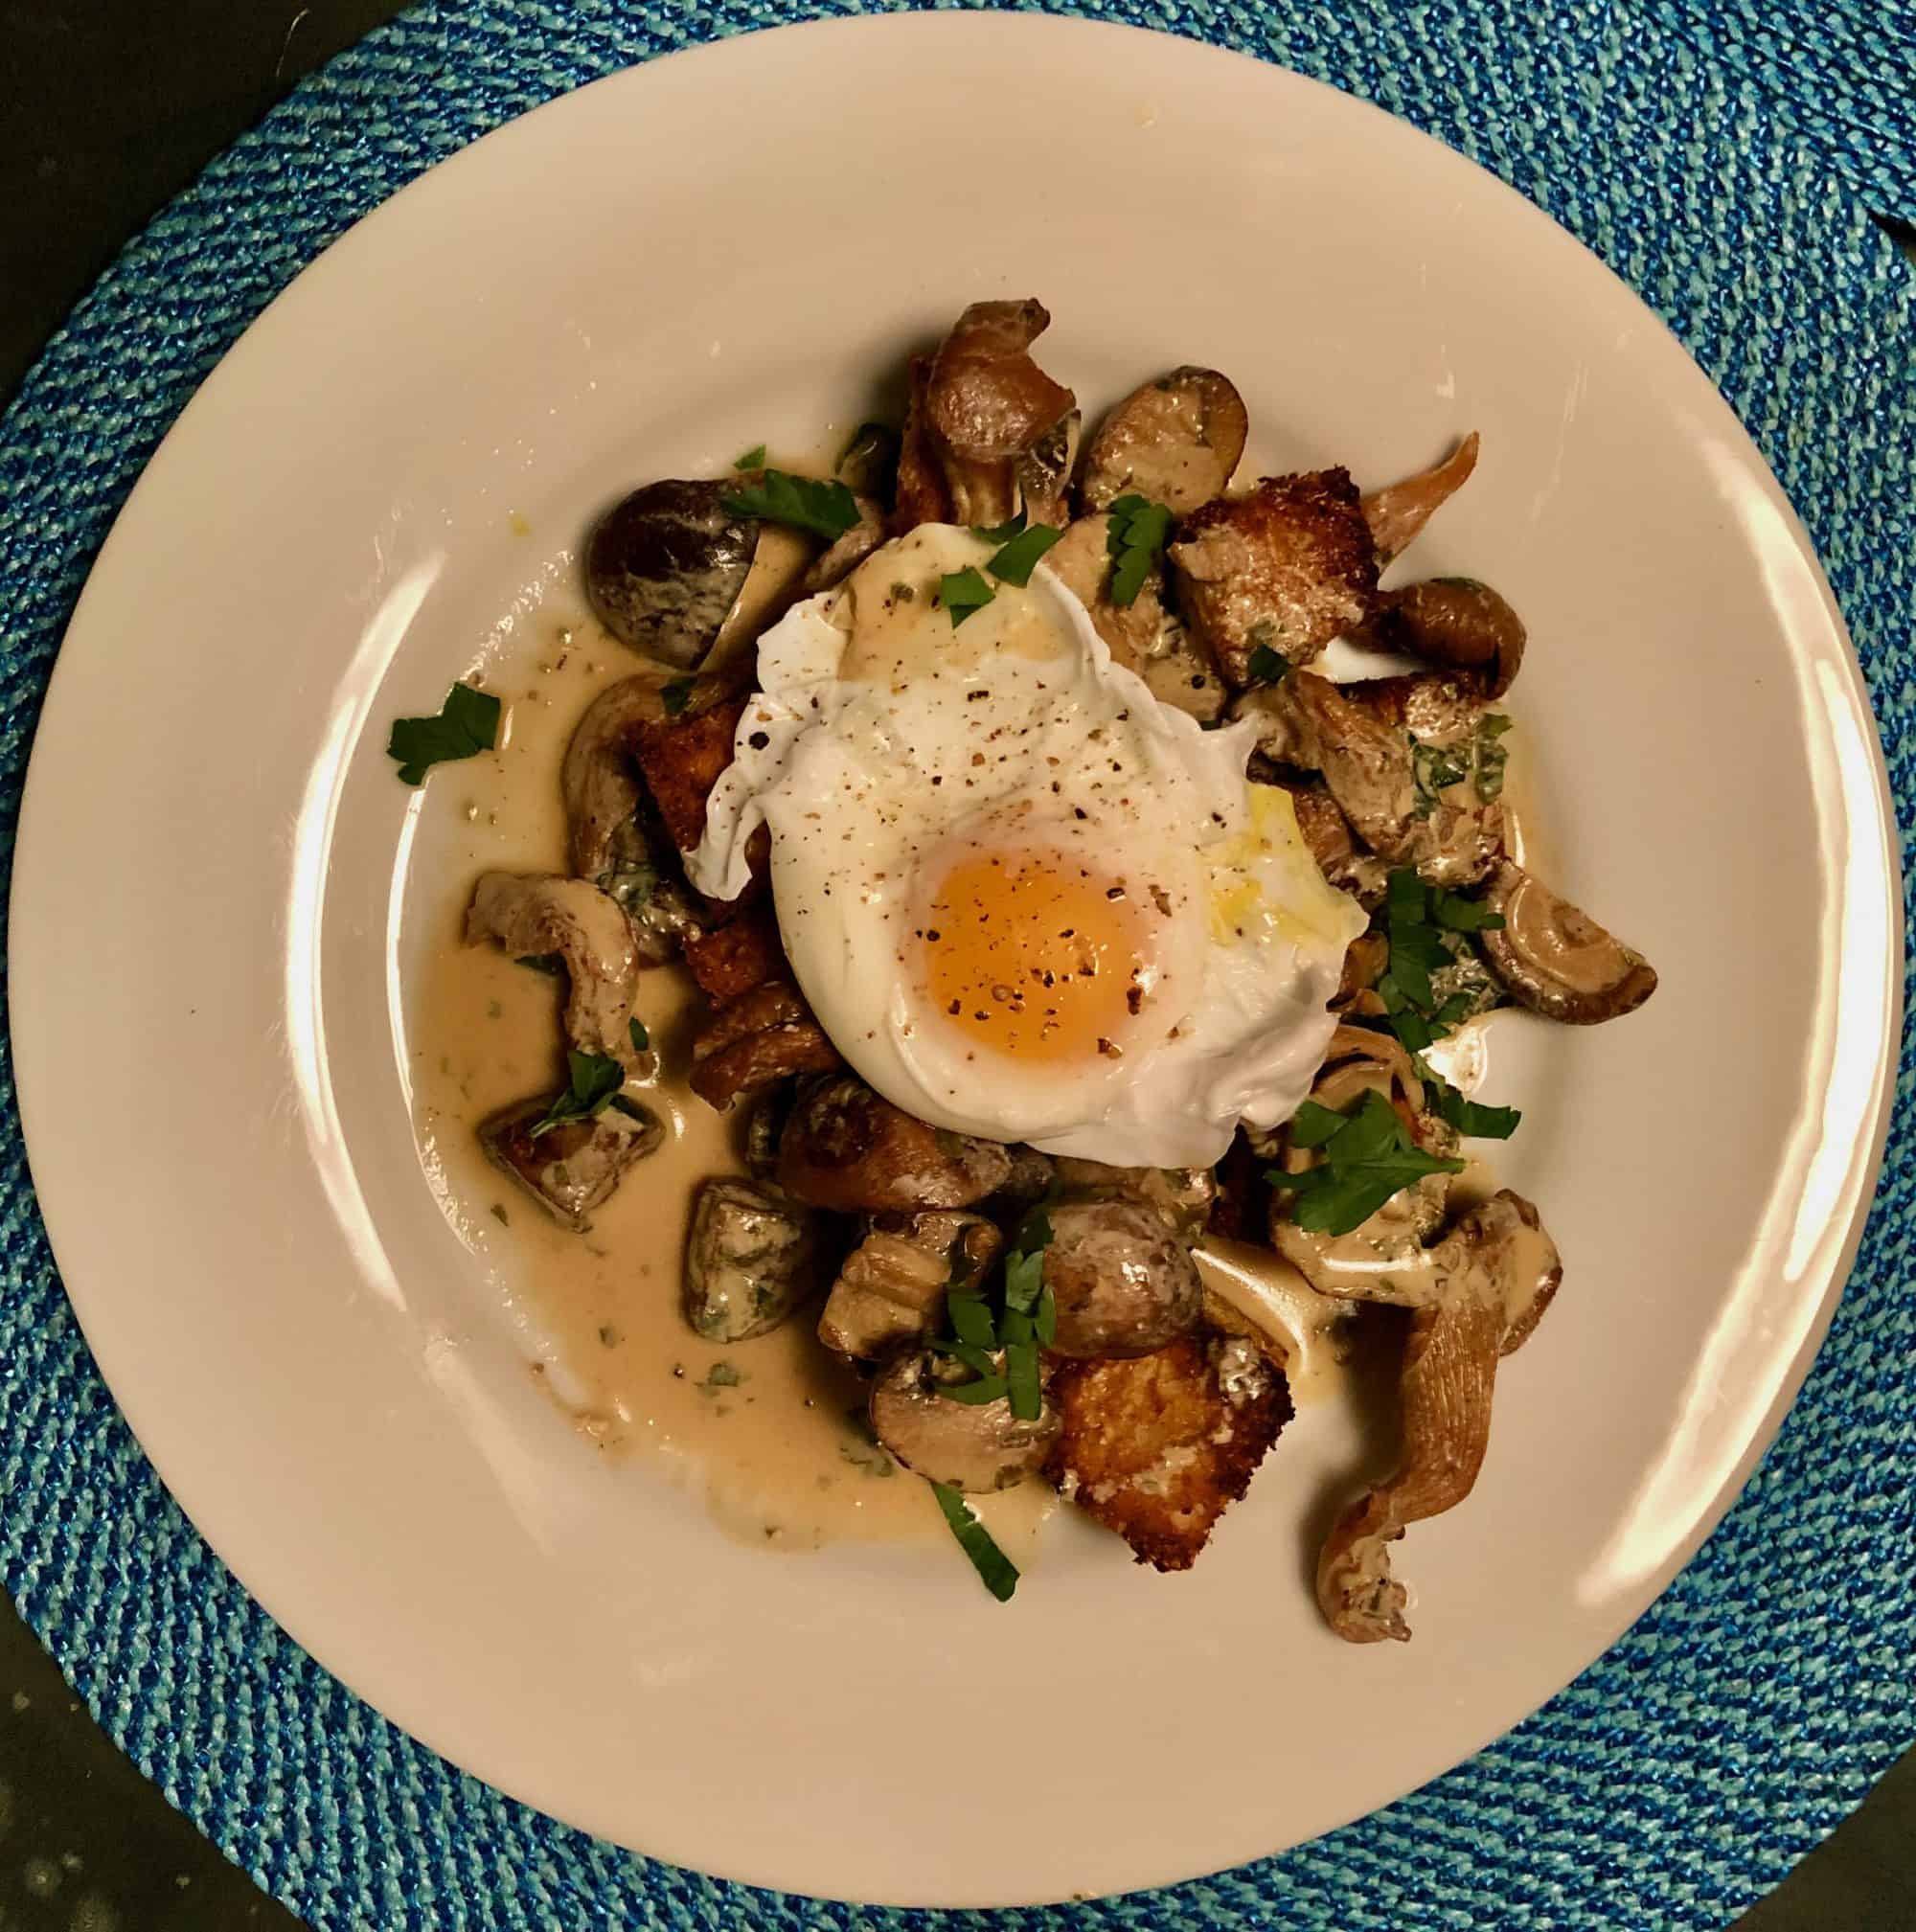 Yotam Ottolenghi’s Mushroom Ragout with a Poached Egg